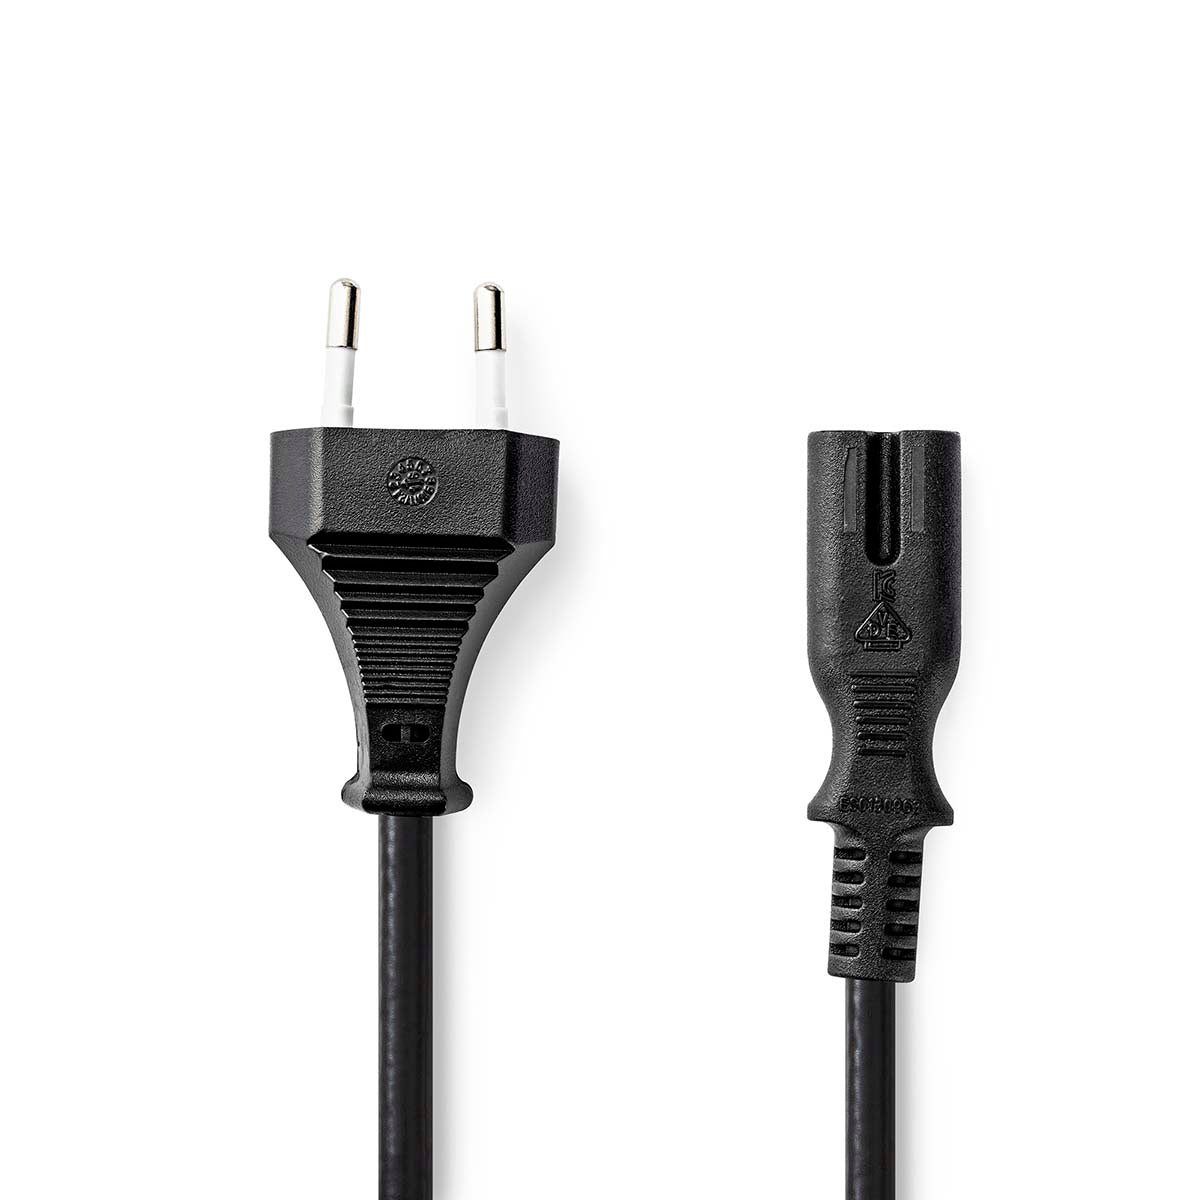 P001195 - AC-Cable Europe C7 universal